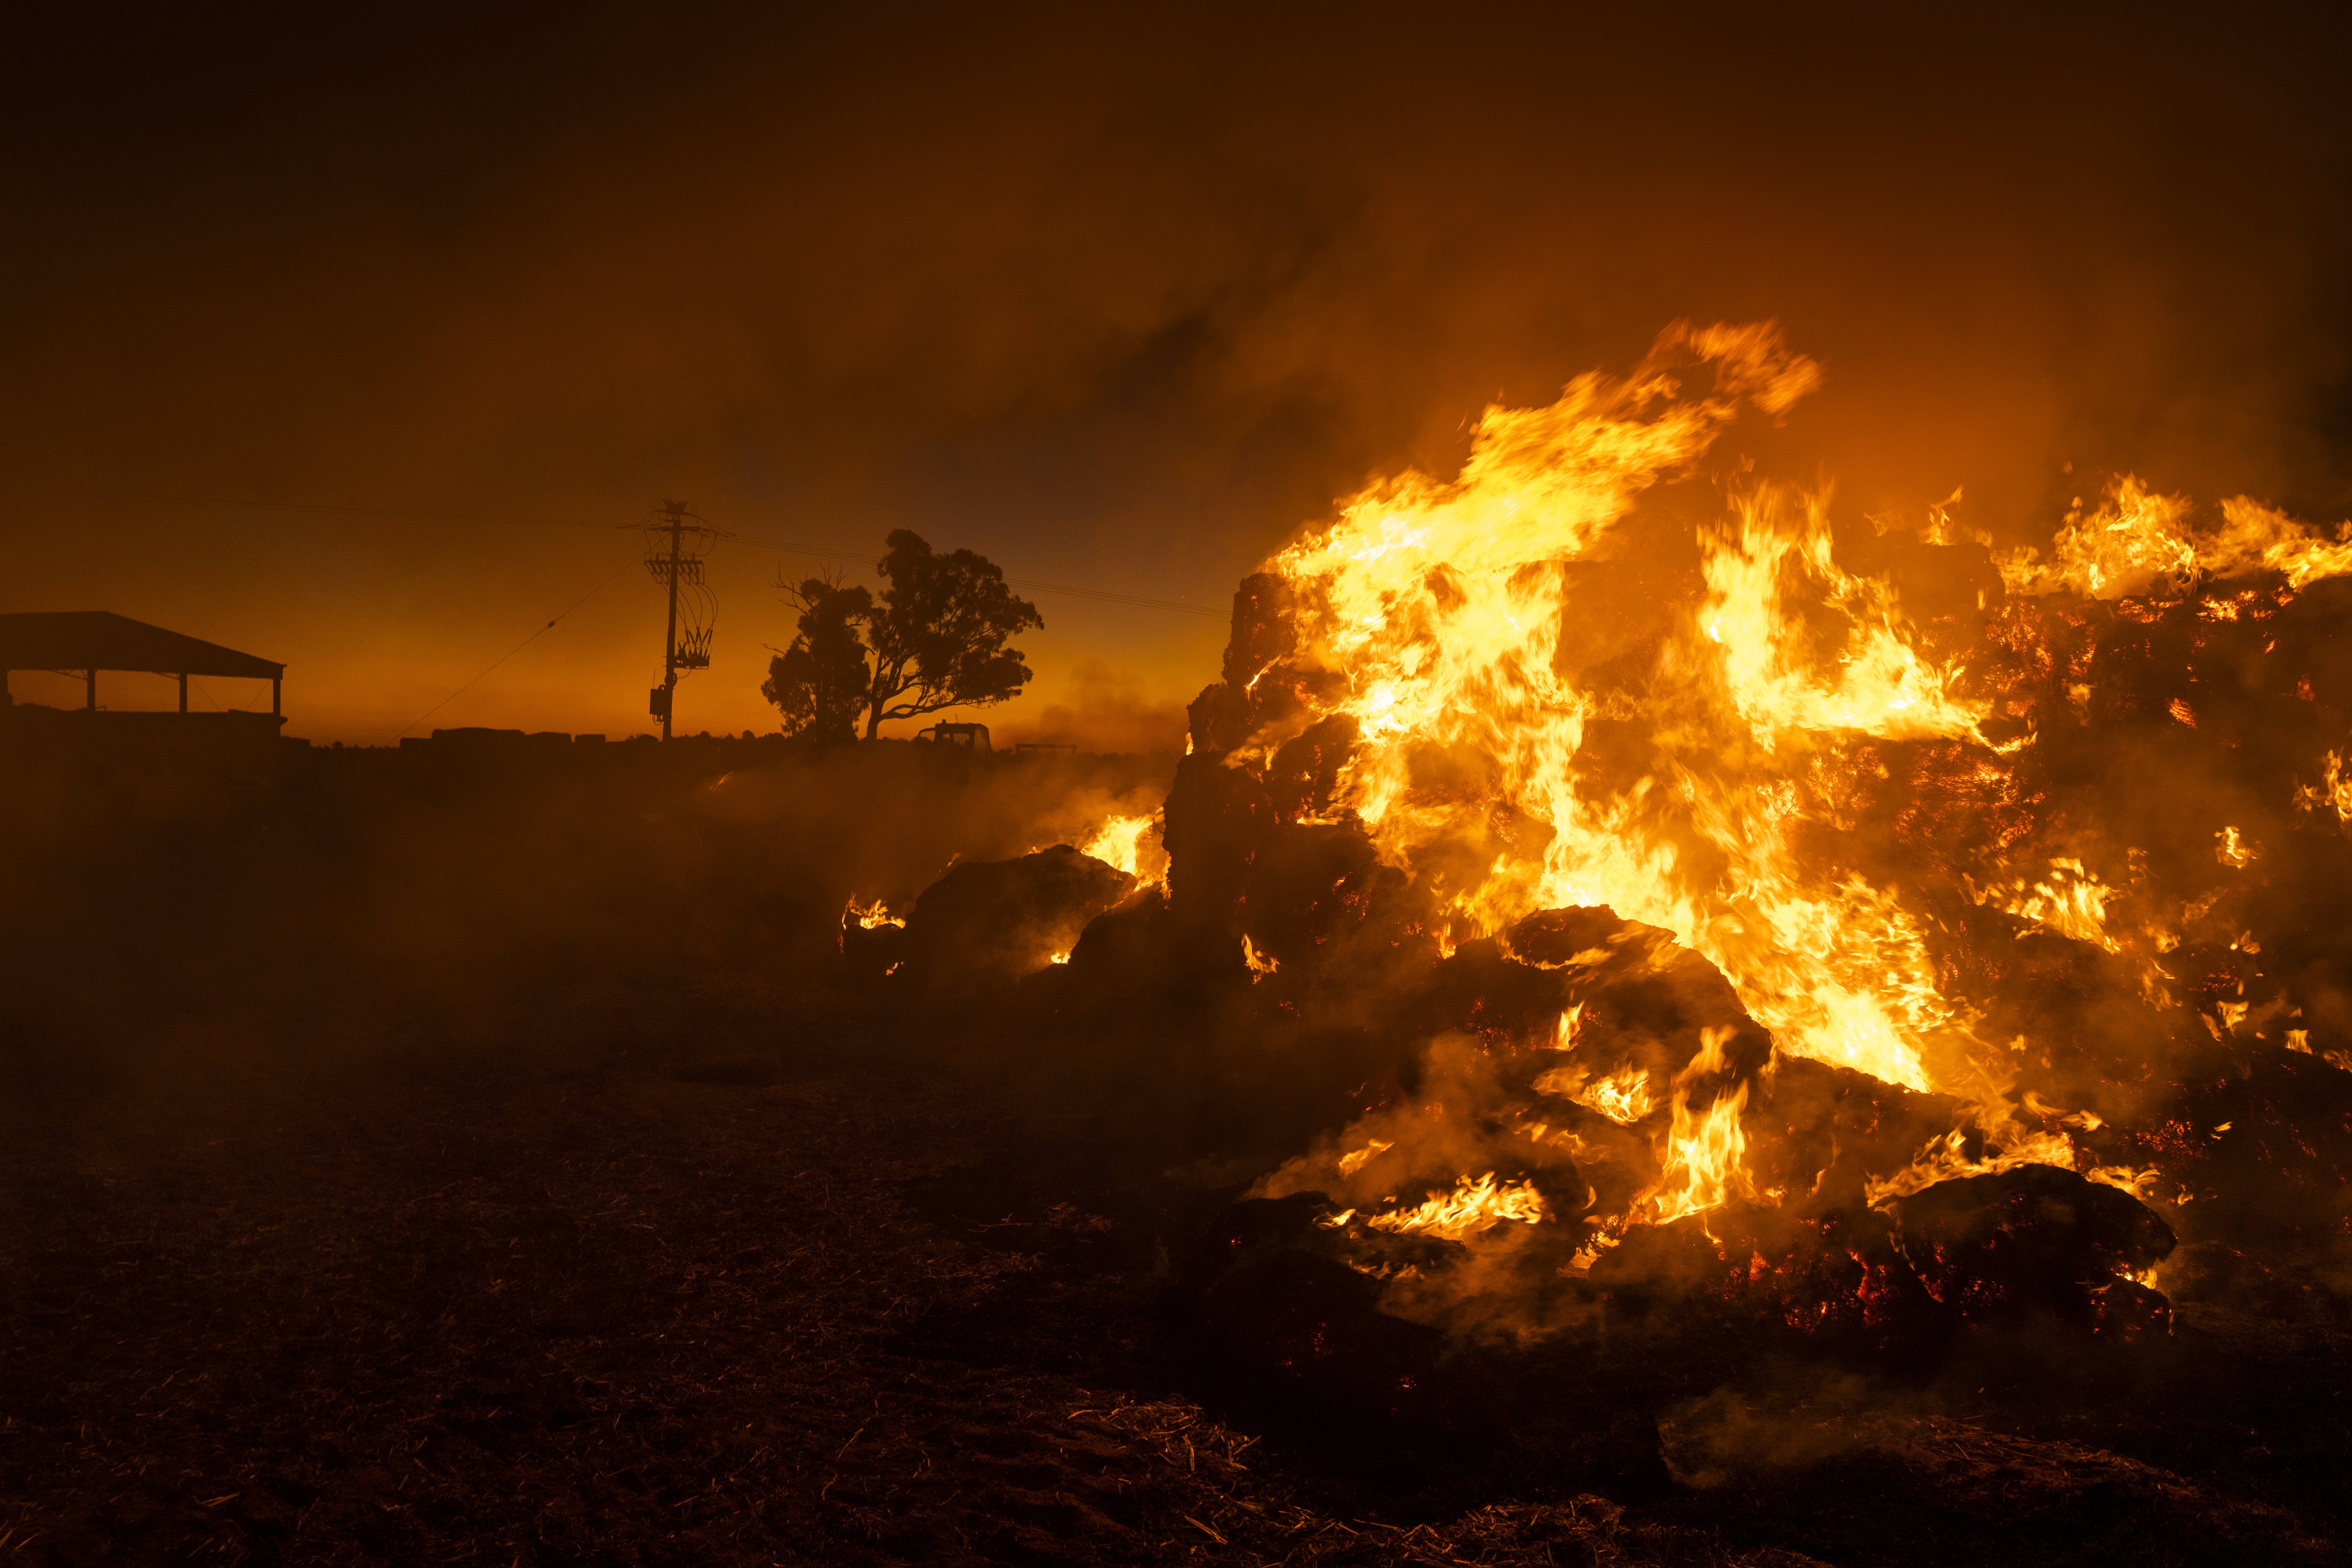 Farmer Greg Younghusband burns approximately 130 bales of hay that have been destroyed by mice near Gilgandra, New South Wales, Australia on 26 May 2021